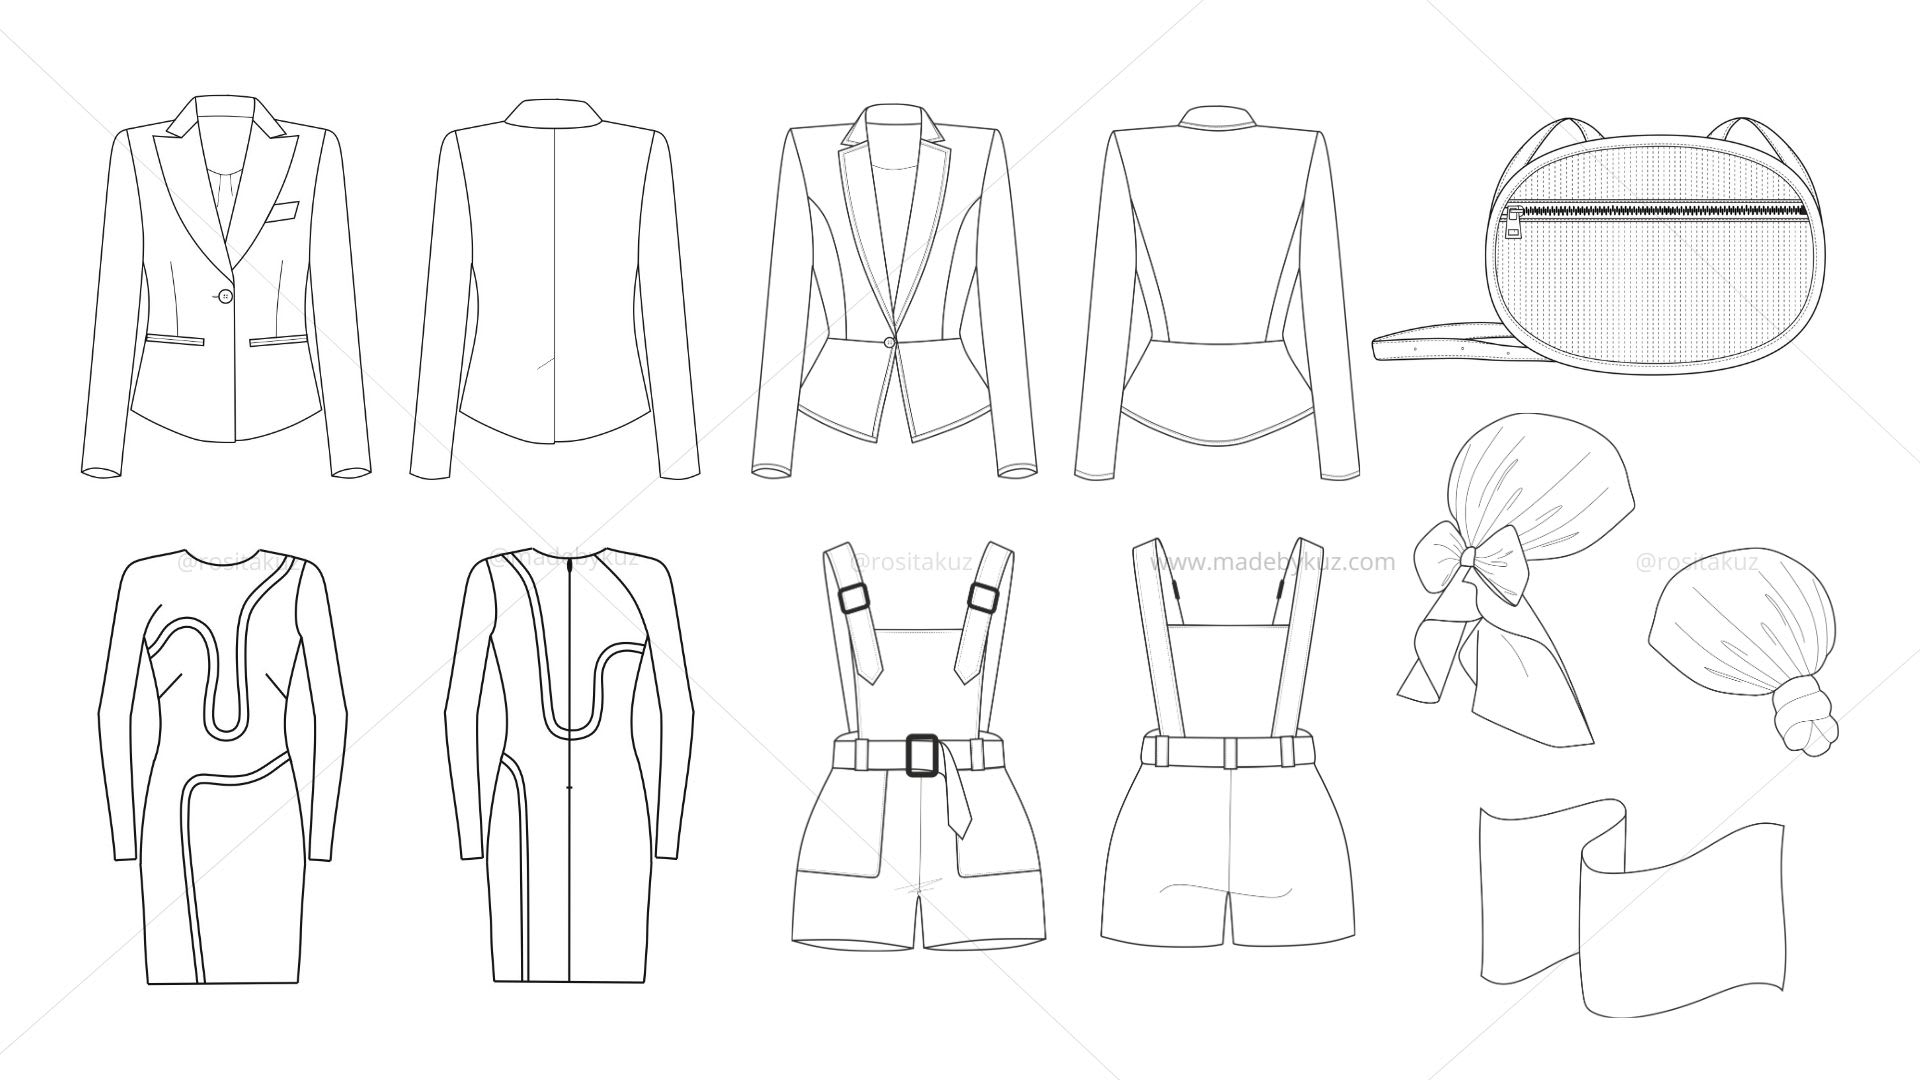 Discover 78+ technical sketch fashion best - in.eteachers